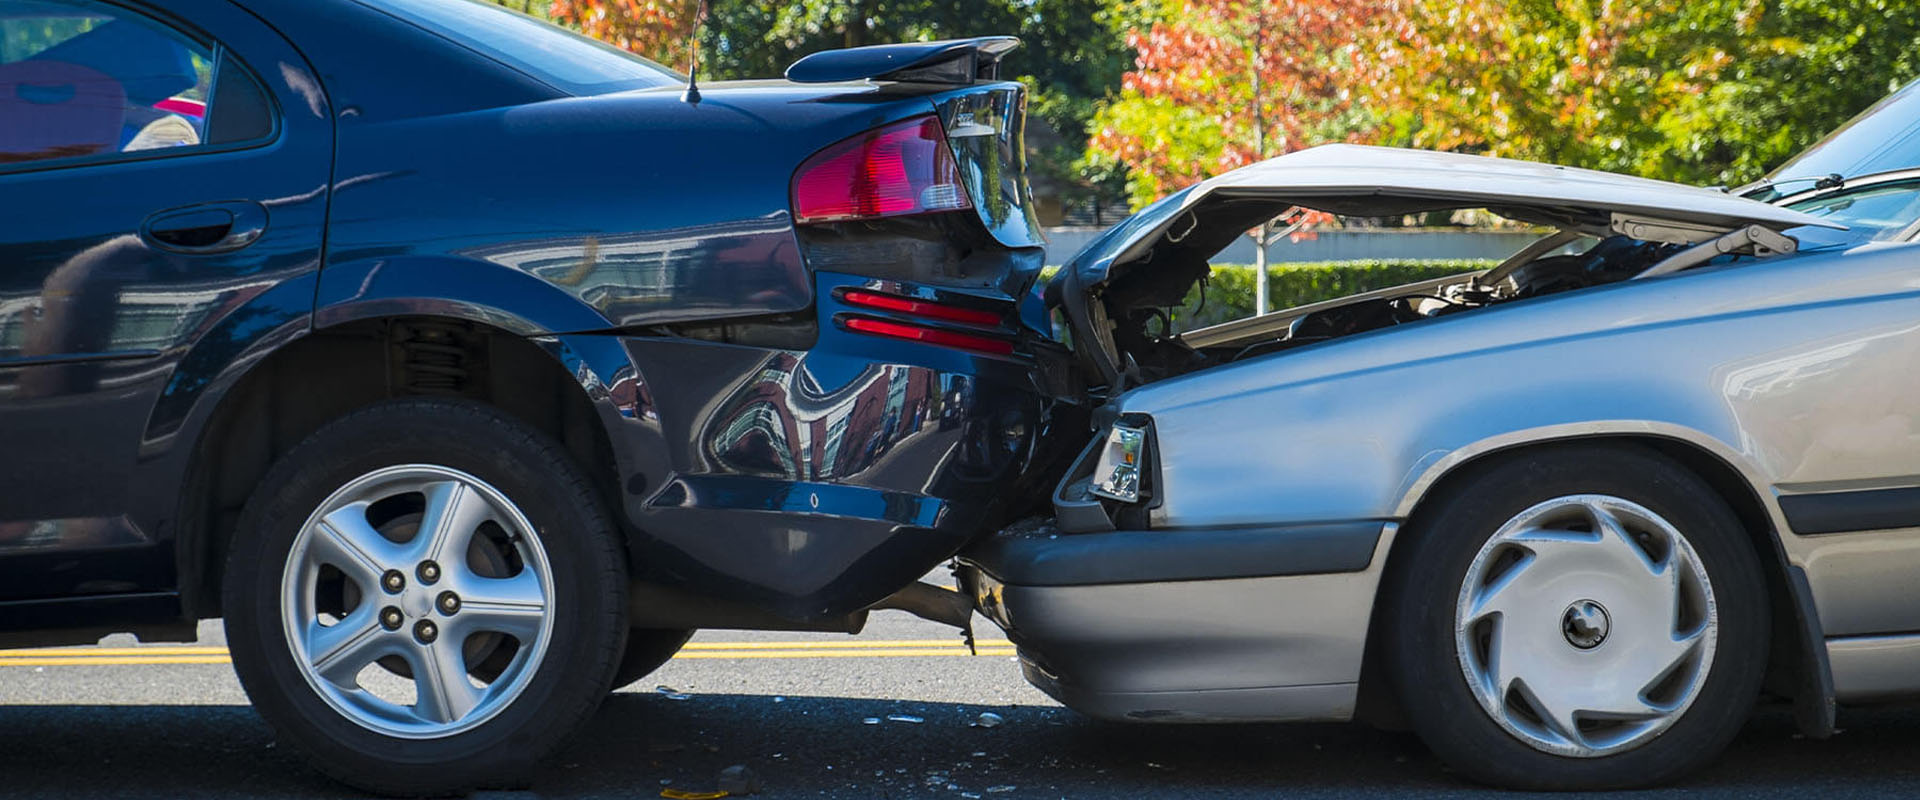 Best New Jersey Auto Accident Attorneys | Newark, Perth Amboy, Toms River, Lakewood